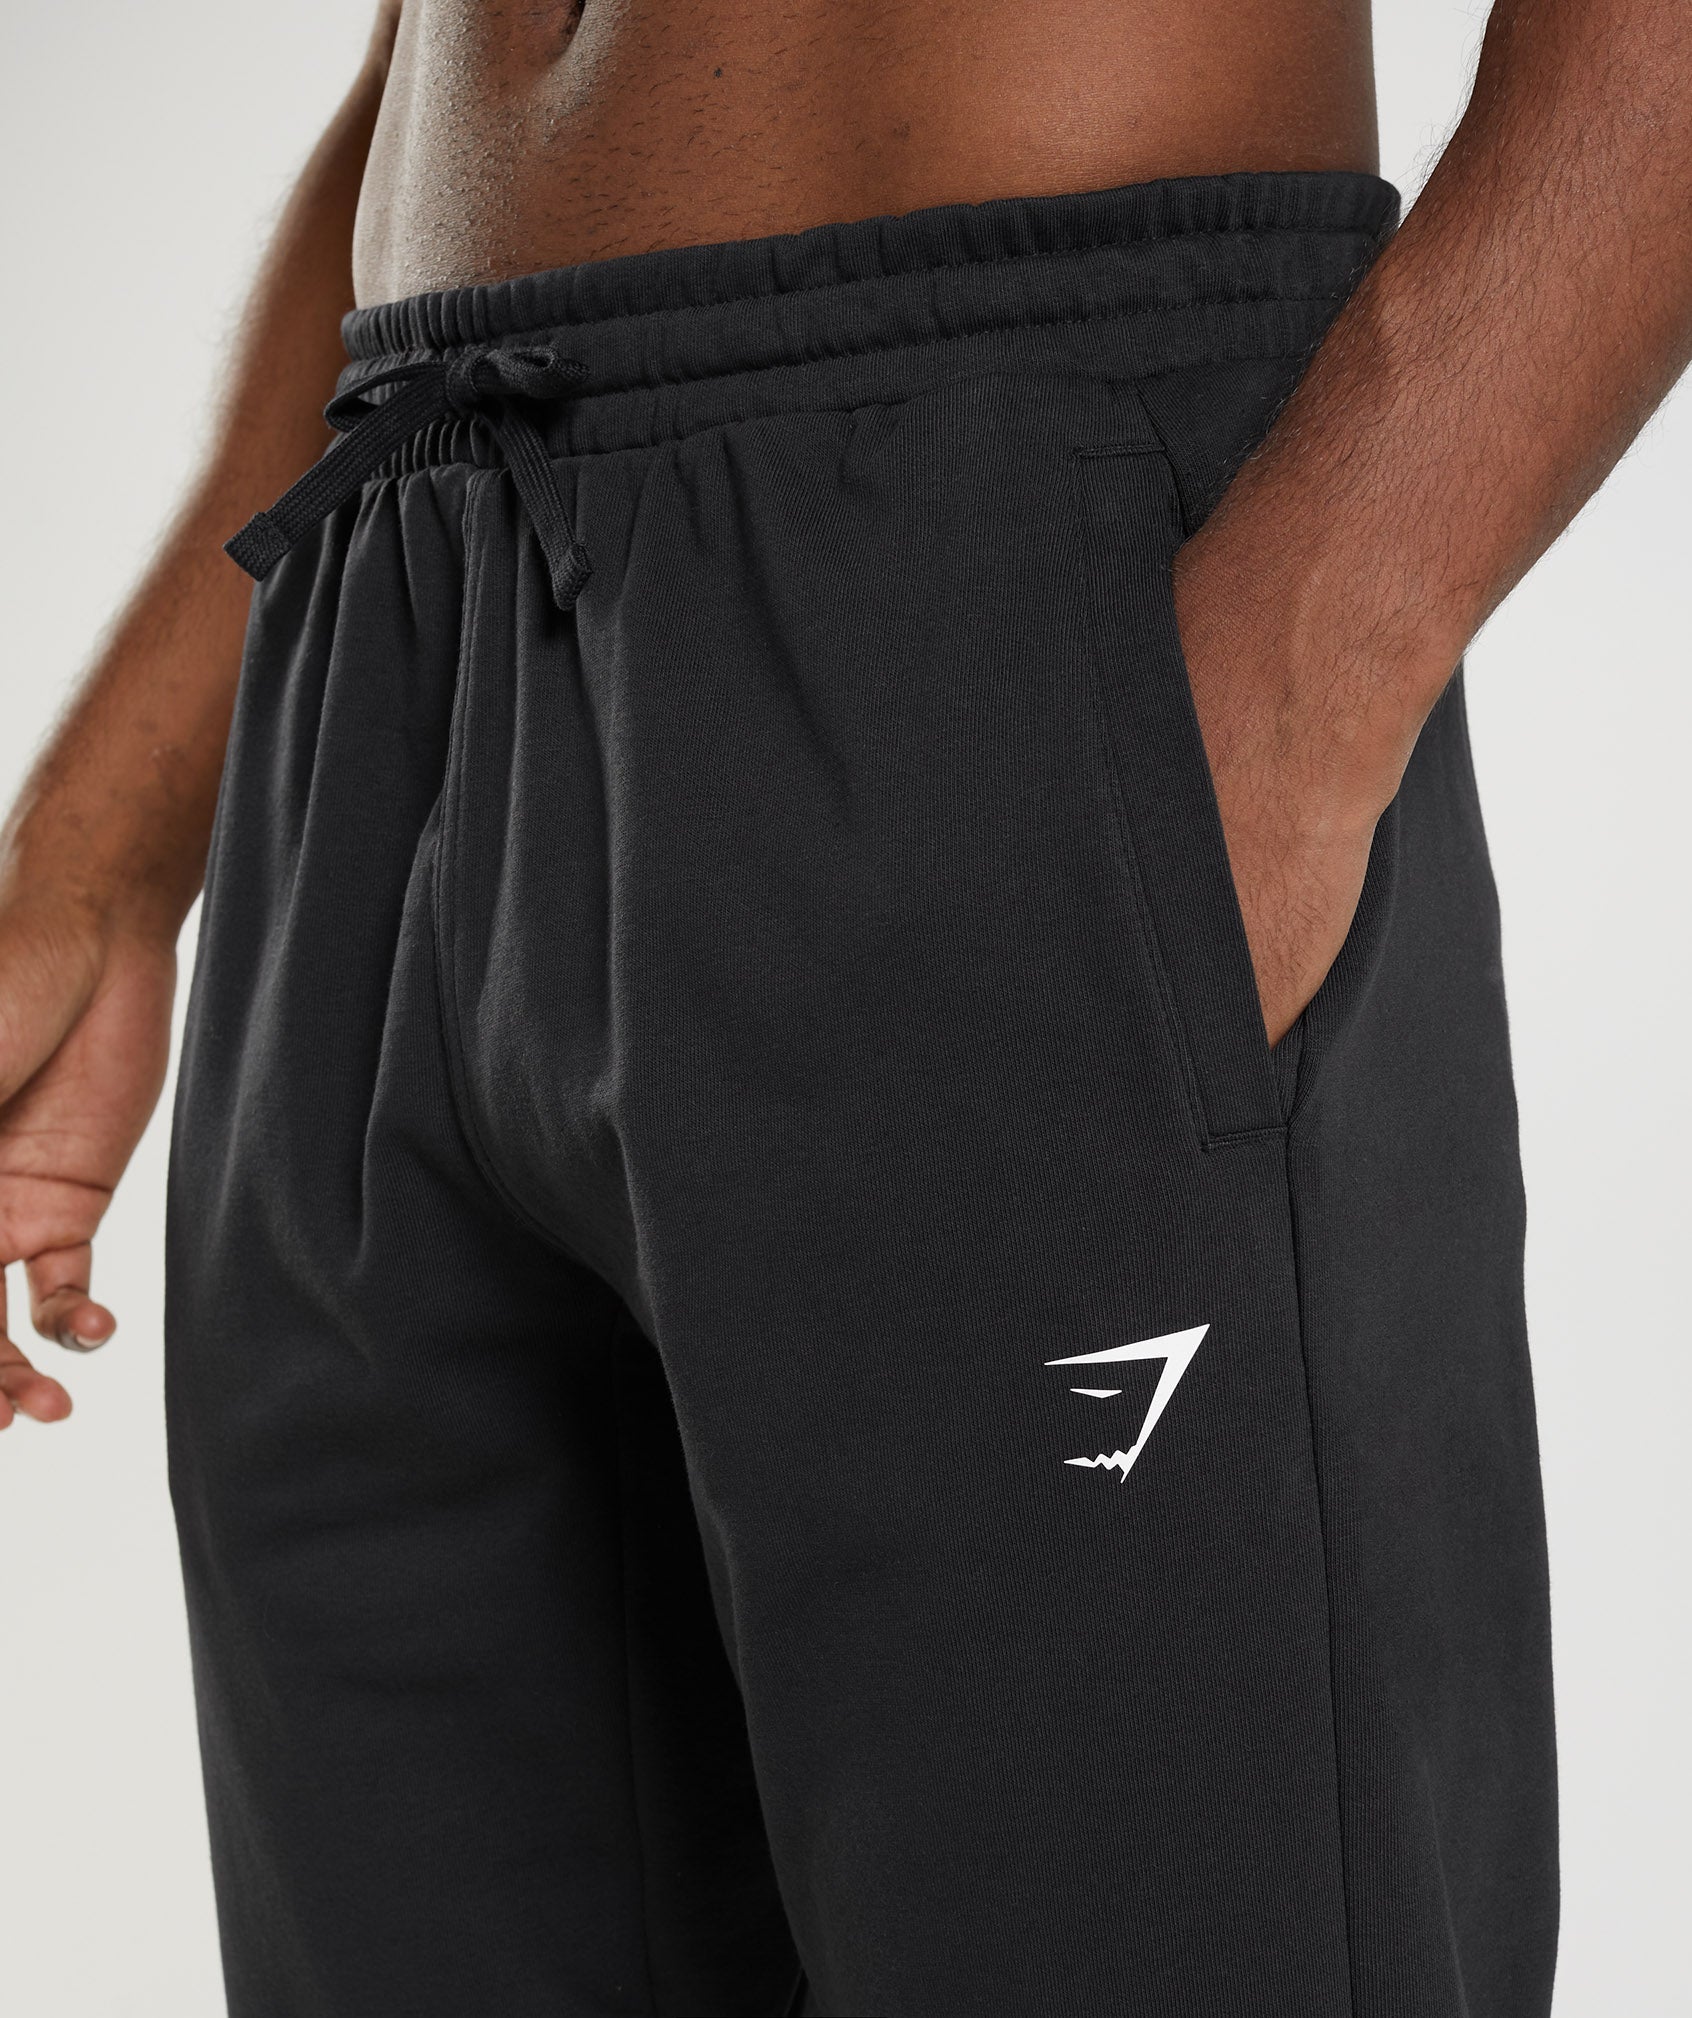 Gymshark on X: Missed out on the Oversized Joggers and Super